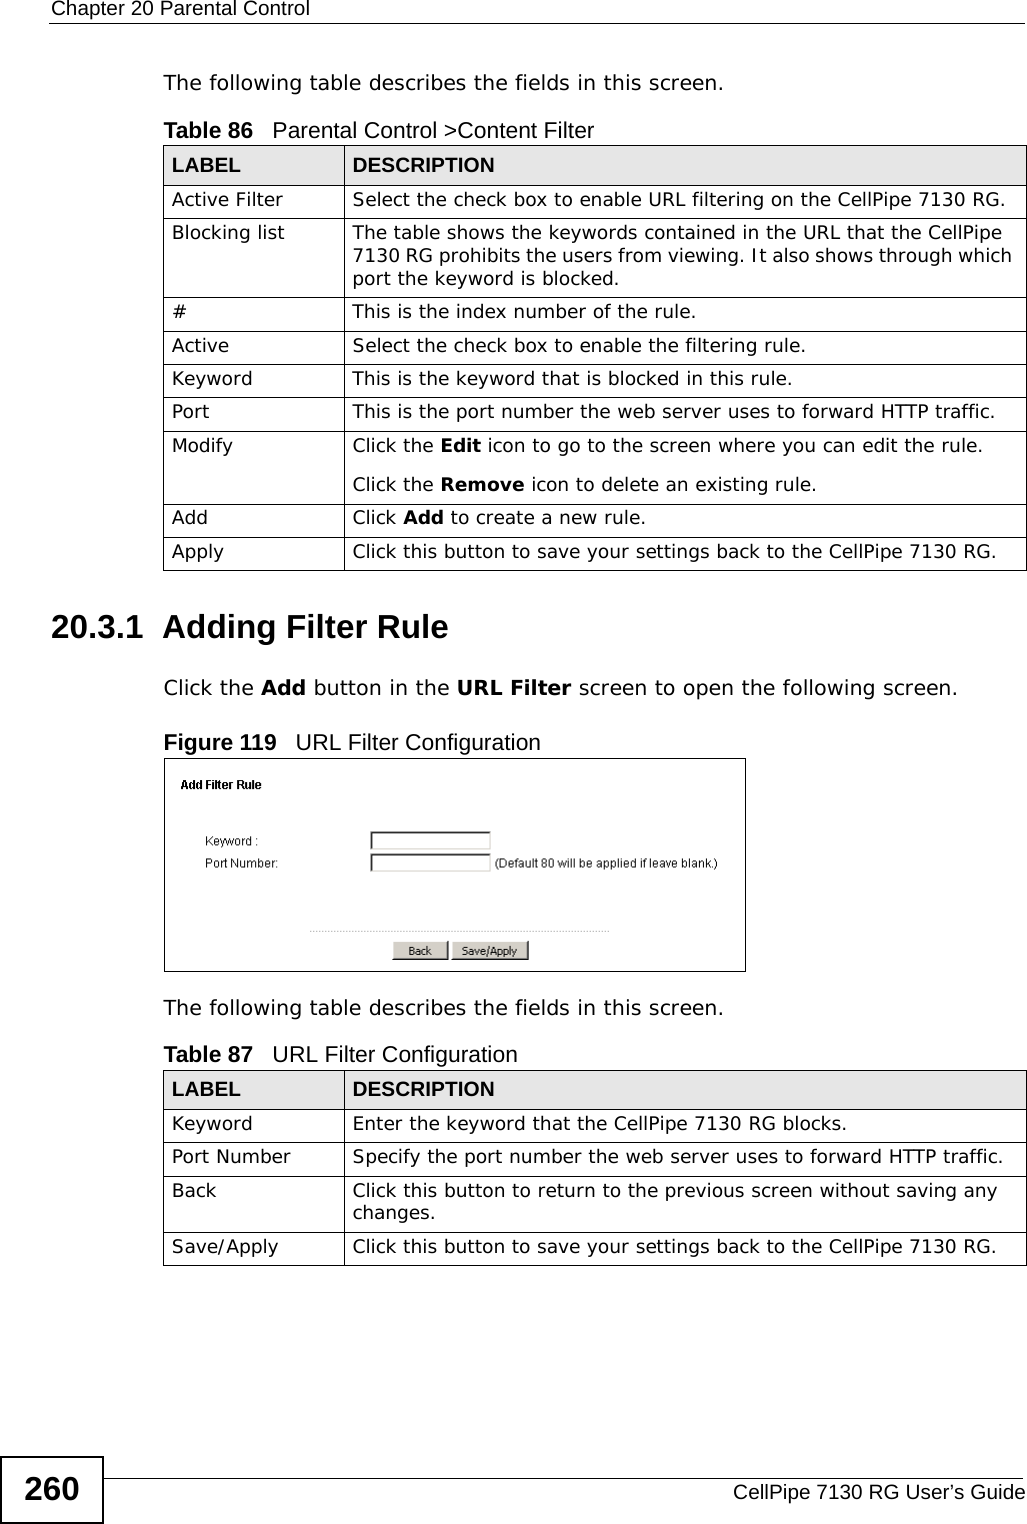 Chapter 20 Parental ControlCellPipe 7130 RG User’s Guide260The following table describes the fields in this screen. 20.3.1  Adding Filter RuleClick the Add button in the URL Filter screen to open the following screen. Figure 119   URL Filter Configuration The following table describes the fields in this screen. Table 86   Parental Control &gt;Content FilterLABEL DESCRIPTIONActive Filter Select the check box to enable URL filtering on the CellPipe 7130 RG.Blocking list The table shows the keywords contained in the URL that the CellPipe 7130 RG prohibits the users from viewing. It also shows through which port the keyword is blocked.# This is the index number of the rule.Active Select the check box to enable the filtering rule.Keyword This is the keyword that is blocked in this rule.Port This is the port number the web server uses to forward HTTP traffic.Modify Click the Edit icon to go to the screen where you can edit the rule.Click the Remove icon to delete an existing rule.Add Click Add to create a new rule.Apply Click this button to save your settings back to the CellPipe 7130 RG.Table 87   URL Filter ConfigurationLABEL DESCRIPTIONKeyword Enter the keyword that the CellPipe 7130 RG blocks.Port Number  Specify the port number the web server uses to forward HTTP traffic.Back Click this button to return to the previous screen without saving any changes.Save/Apply Click this button to save your settings back to the CellPipe 7130 RG.